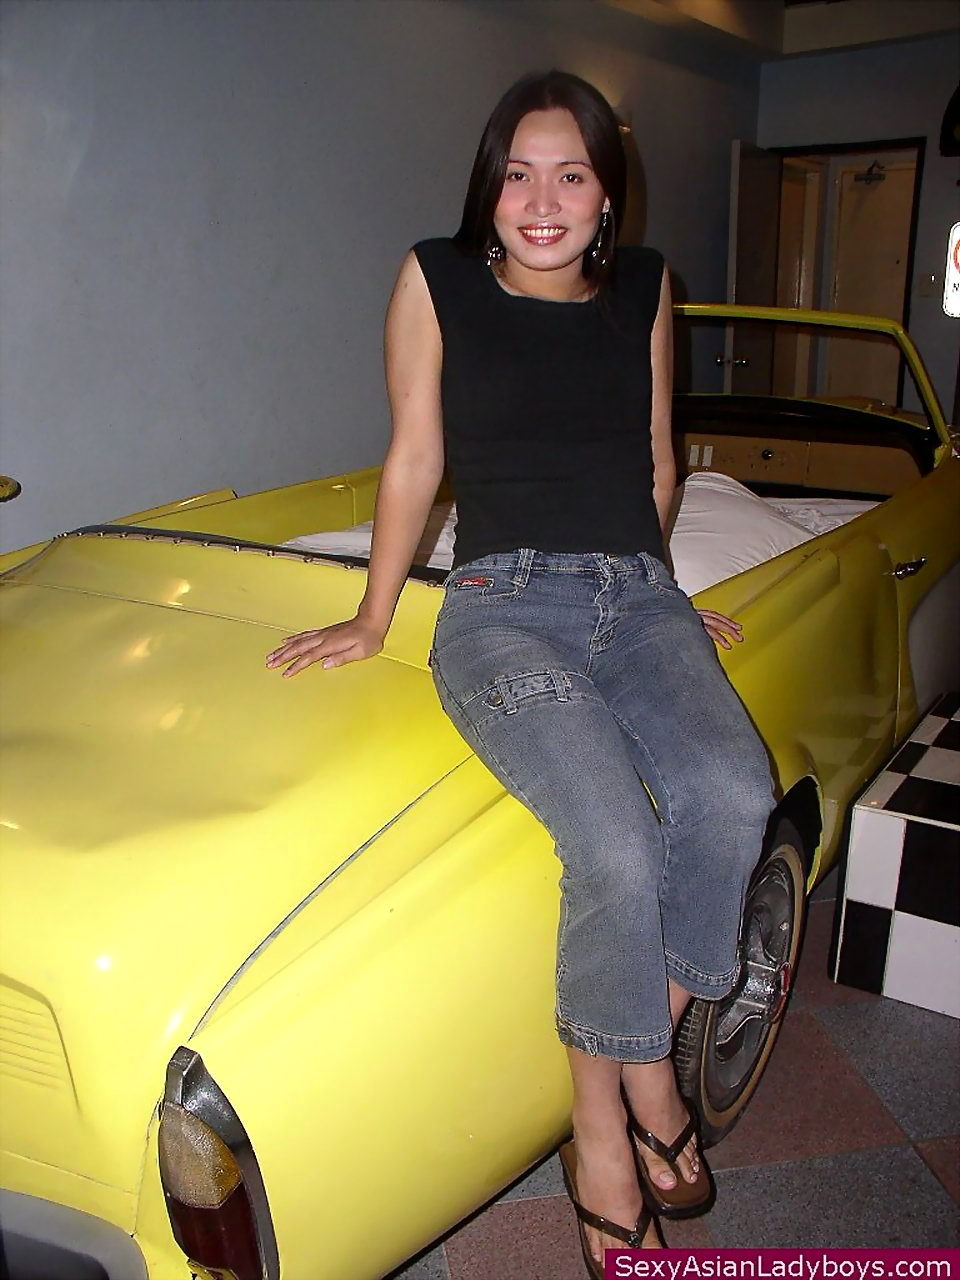 Slender Tgirl Ready For The Shag In The Car Shaped Bed Of A Love Hotel Room